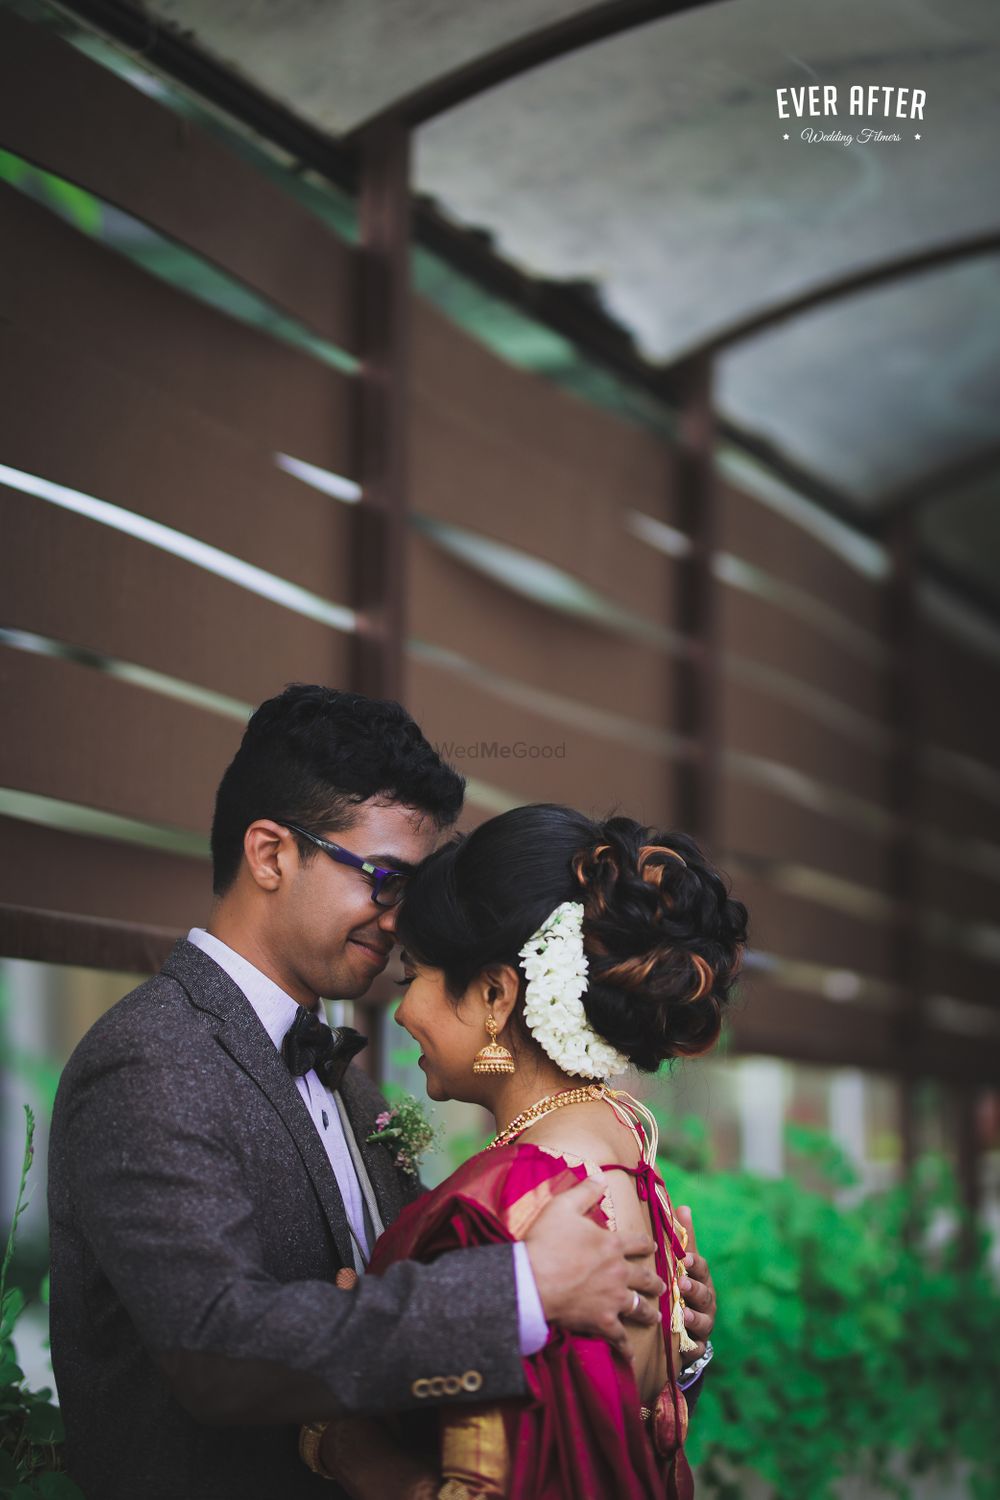 Photo From And so the adventure begins... - By Ever After Wedding Filmers